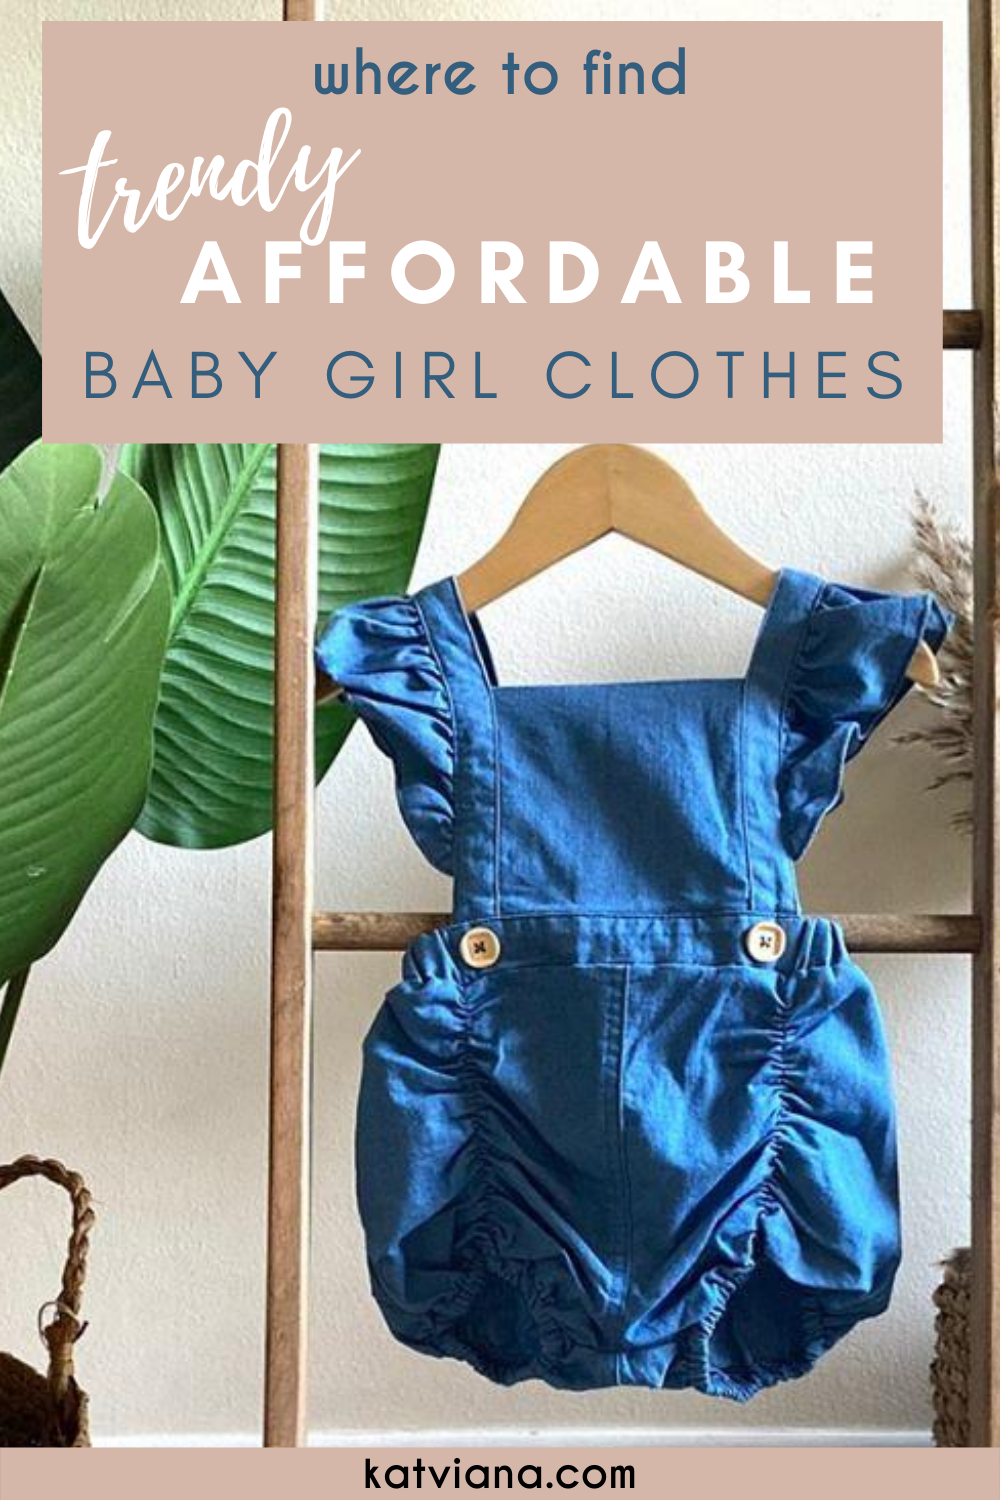 Where To Find Trendy Affordable Baby Girl Clothes | Kat Viana